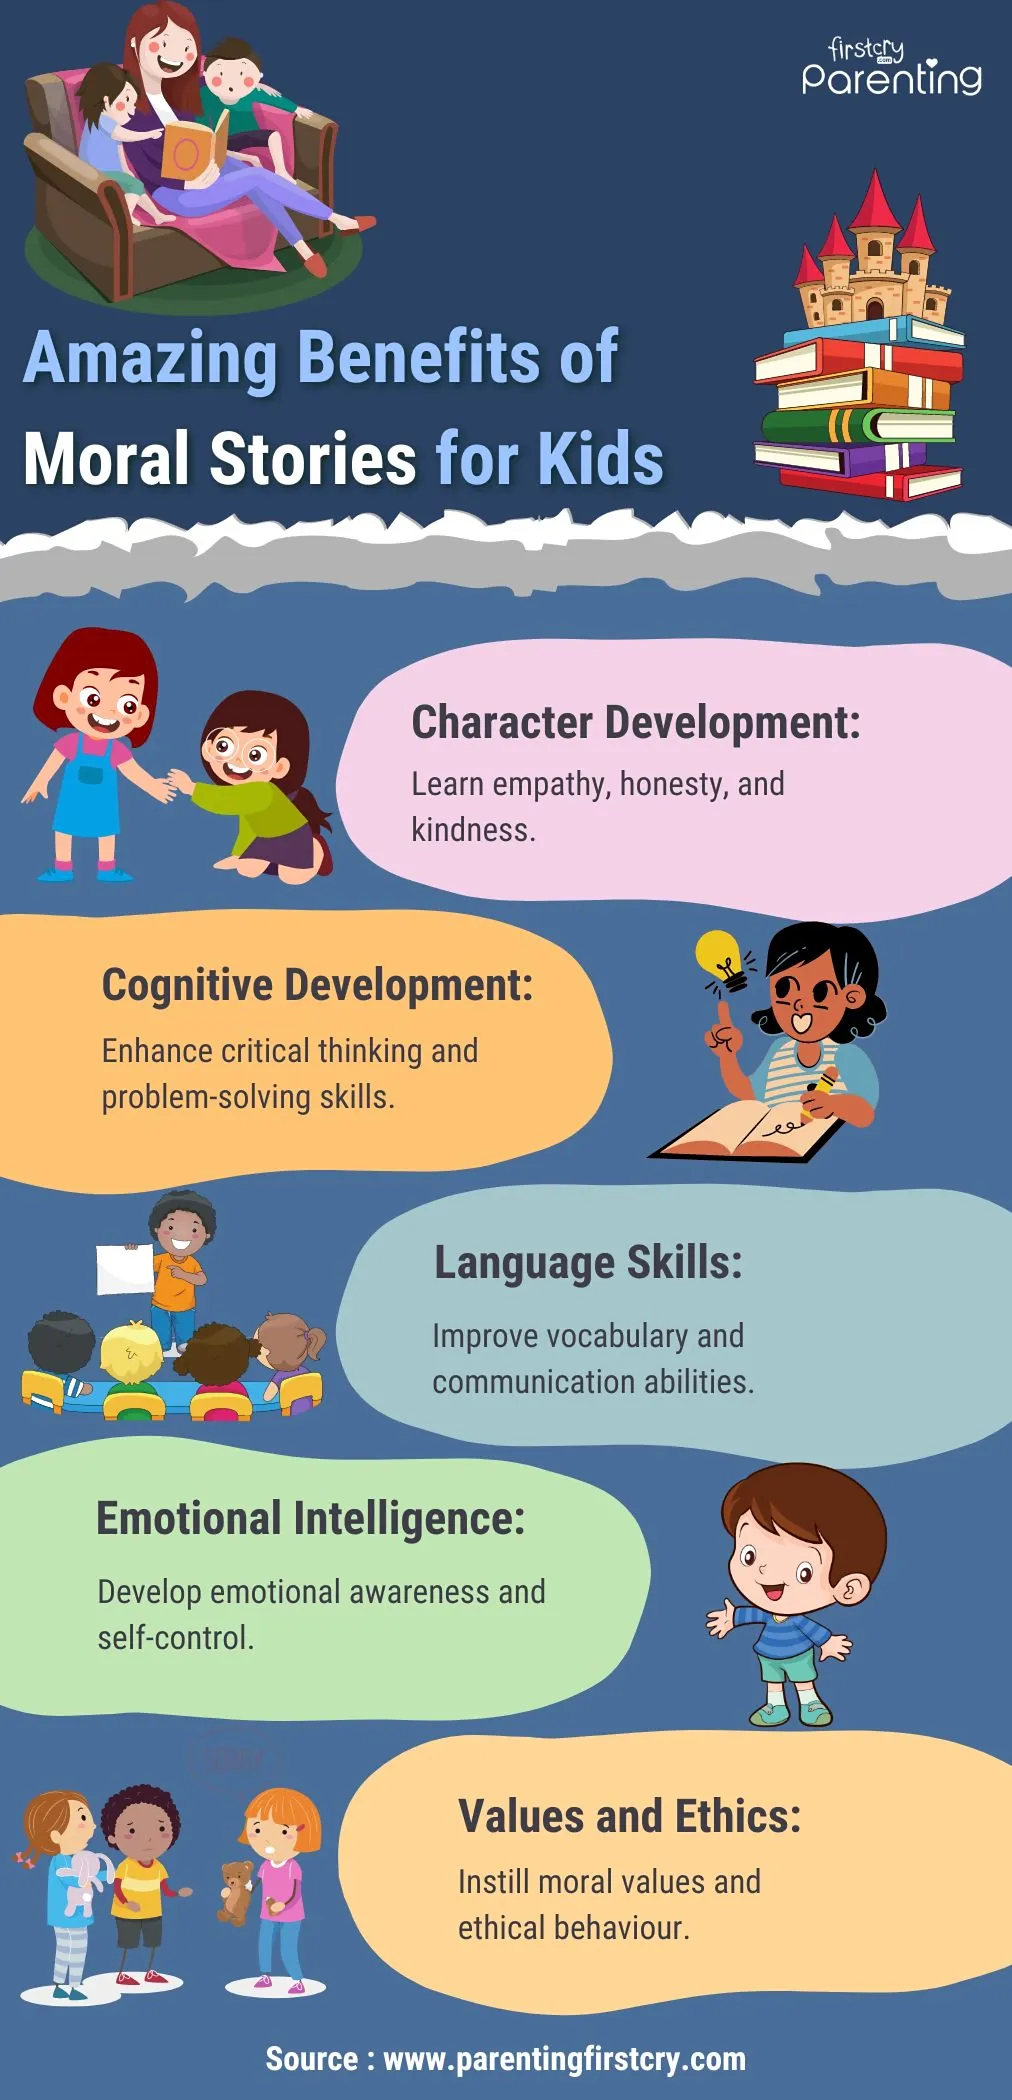 Amazing Benefits of Moral Stories for Kids - Infographic